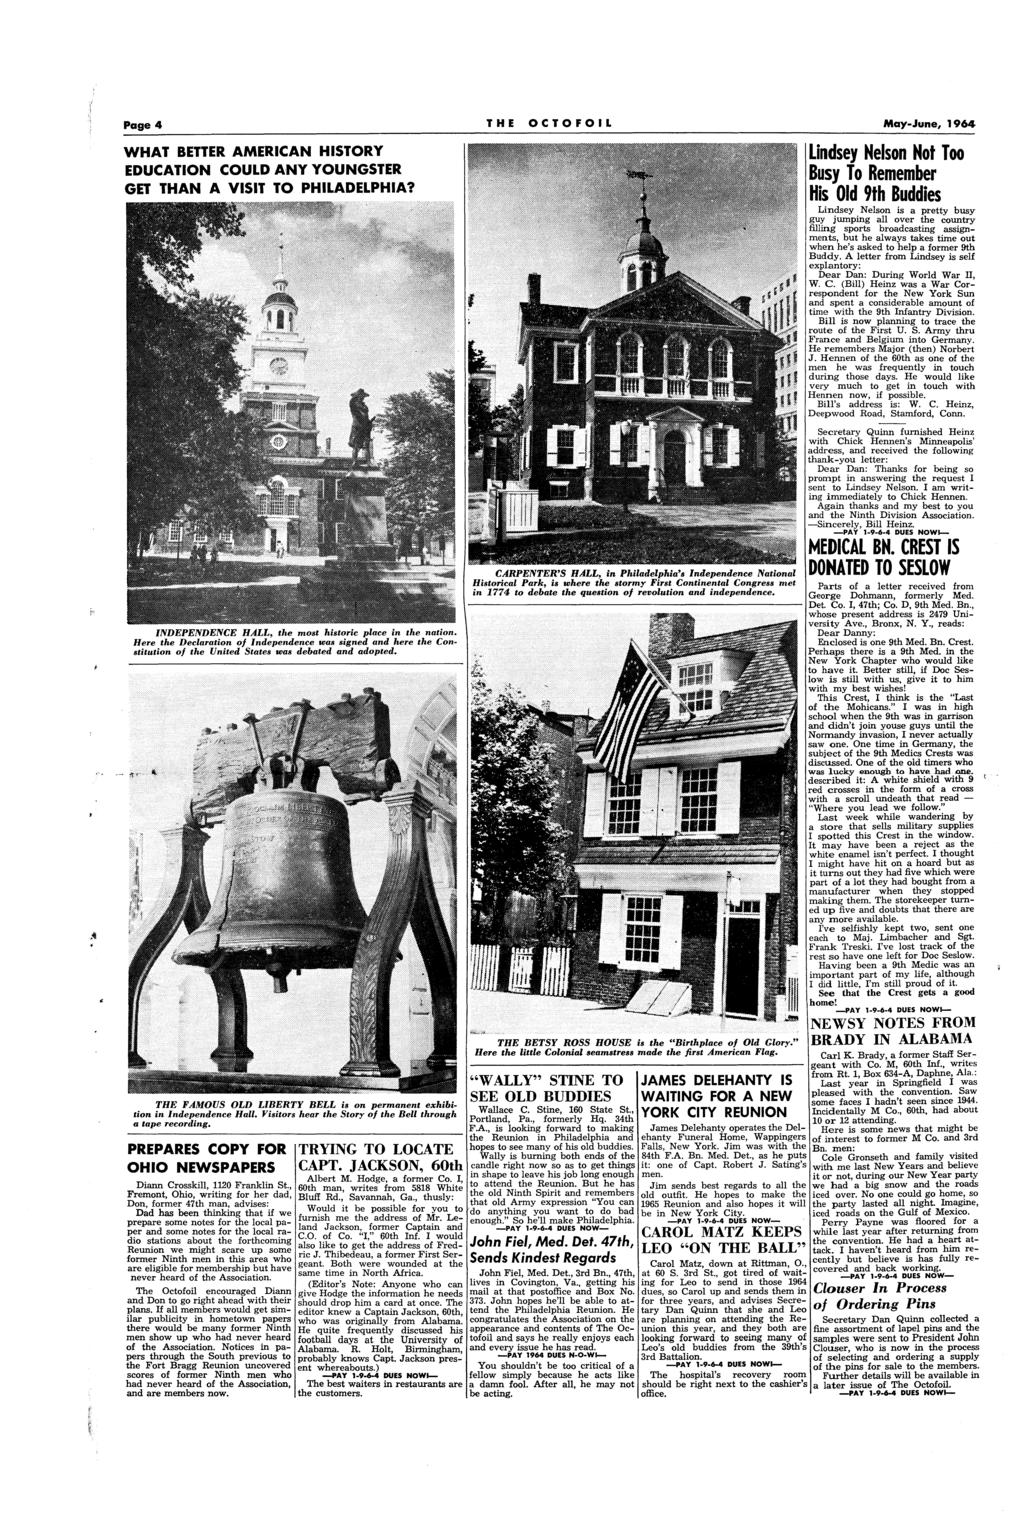 Page 4 THE OCTOFOIL May-June, 1964 WHAT BETTER AMERICAN HISTORY EDUCATION COULD A,NY YOUNGSTER GET THAN A VISIT TO PHILADELPHIA? THE FAMOUS OLD LIBERTY BELL s on permanent exhbton n Independence Hall.